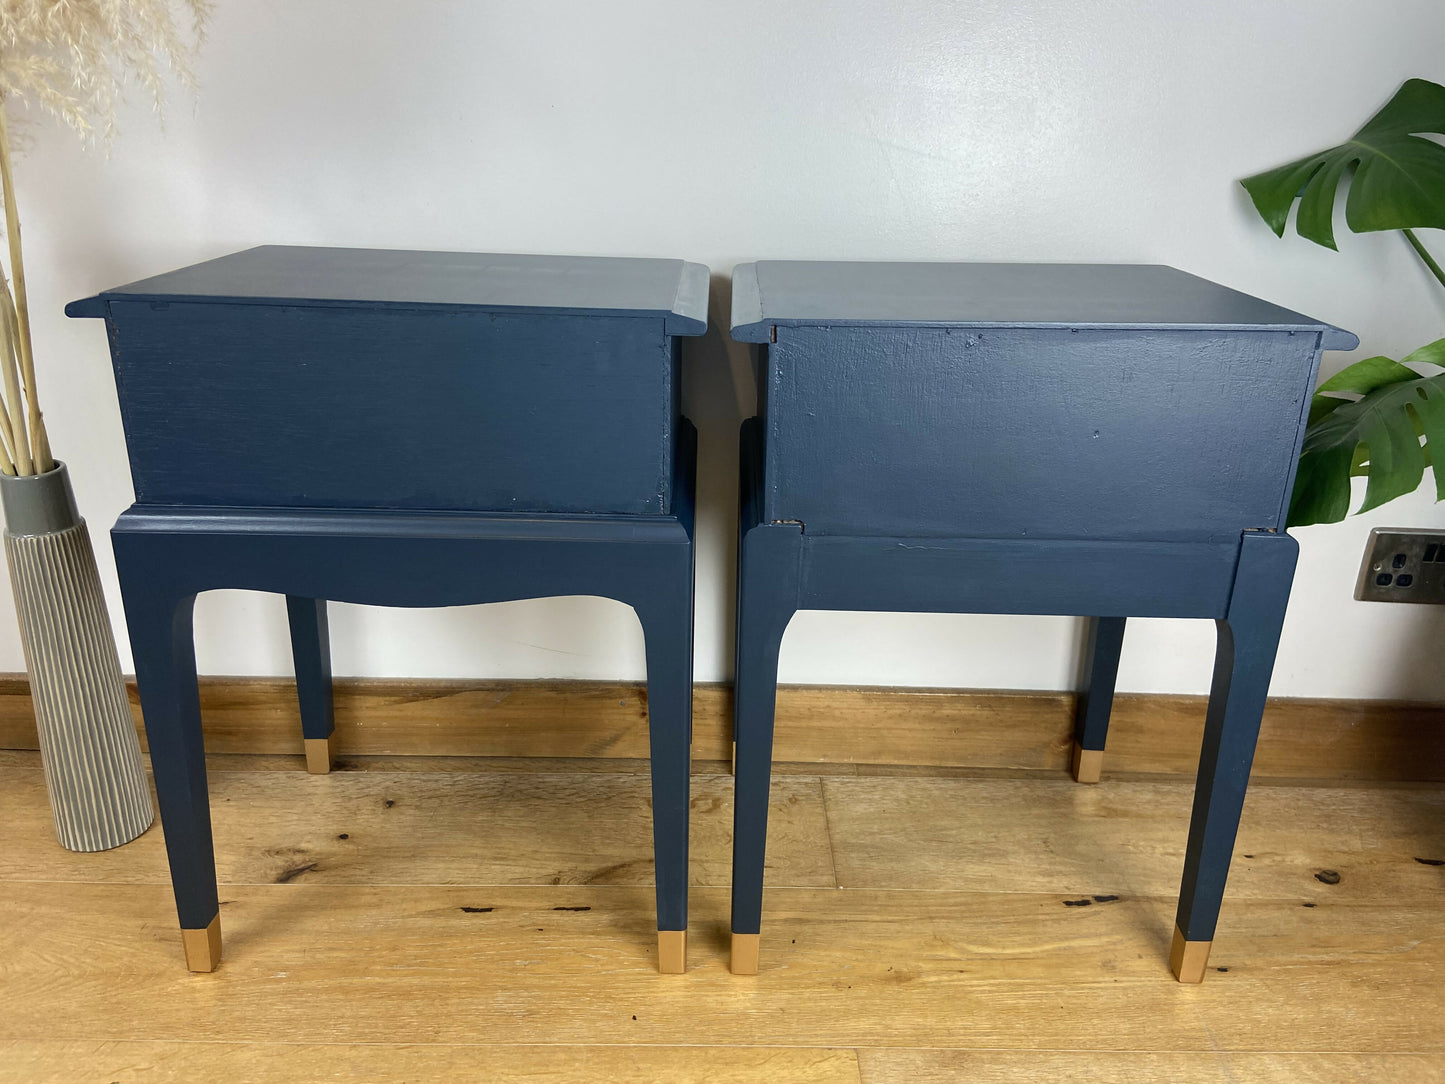 Stag leggy bedside cabinets (pair)